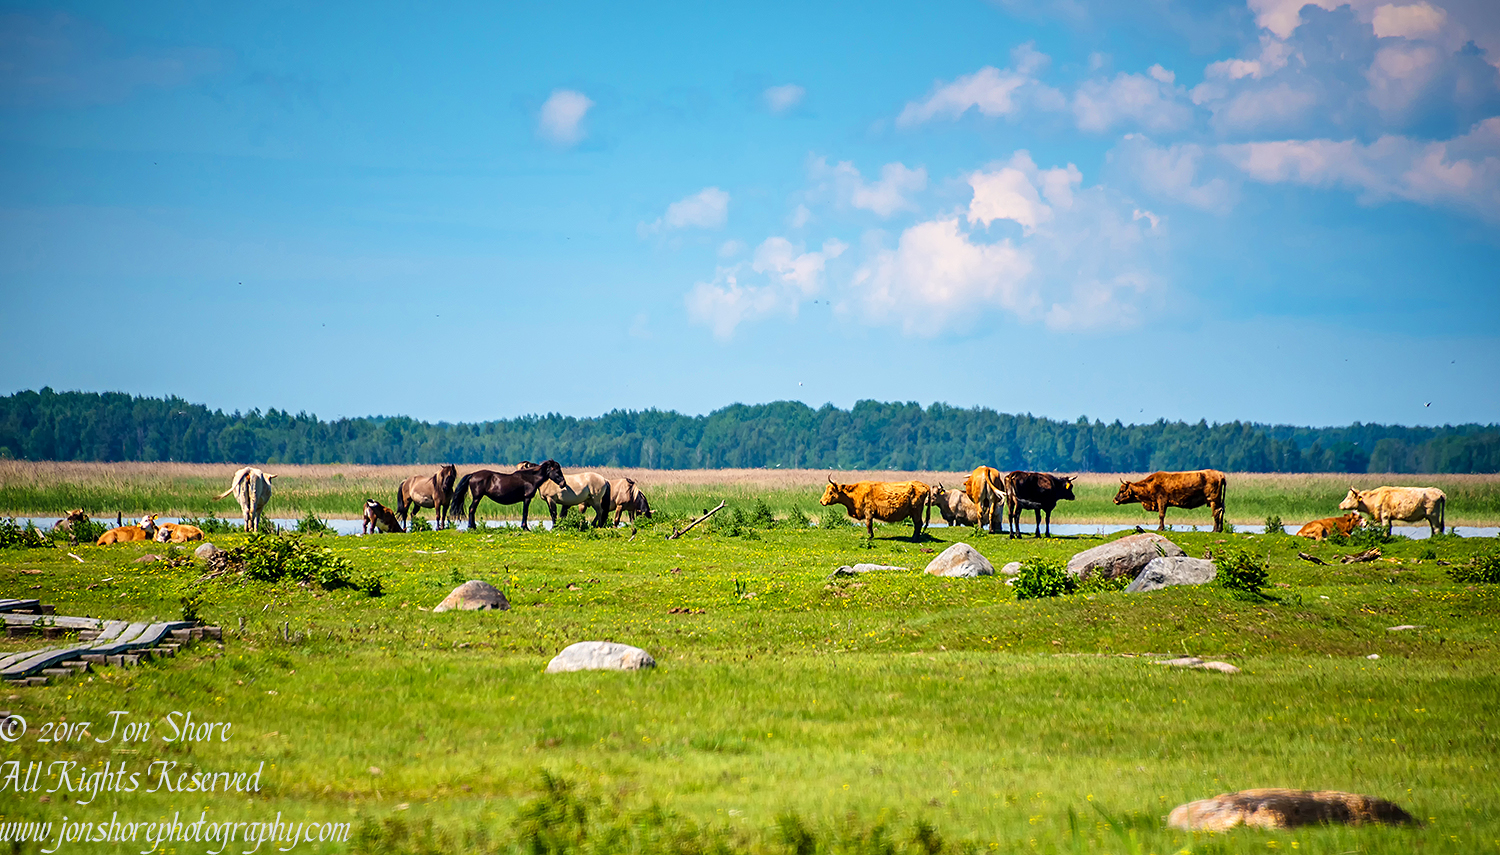 Wild horses and cattle Engure Lake Meadow Latvia June 2017. Nikkor 300mm